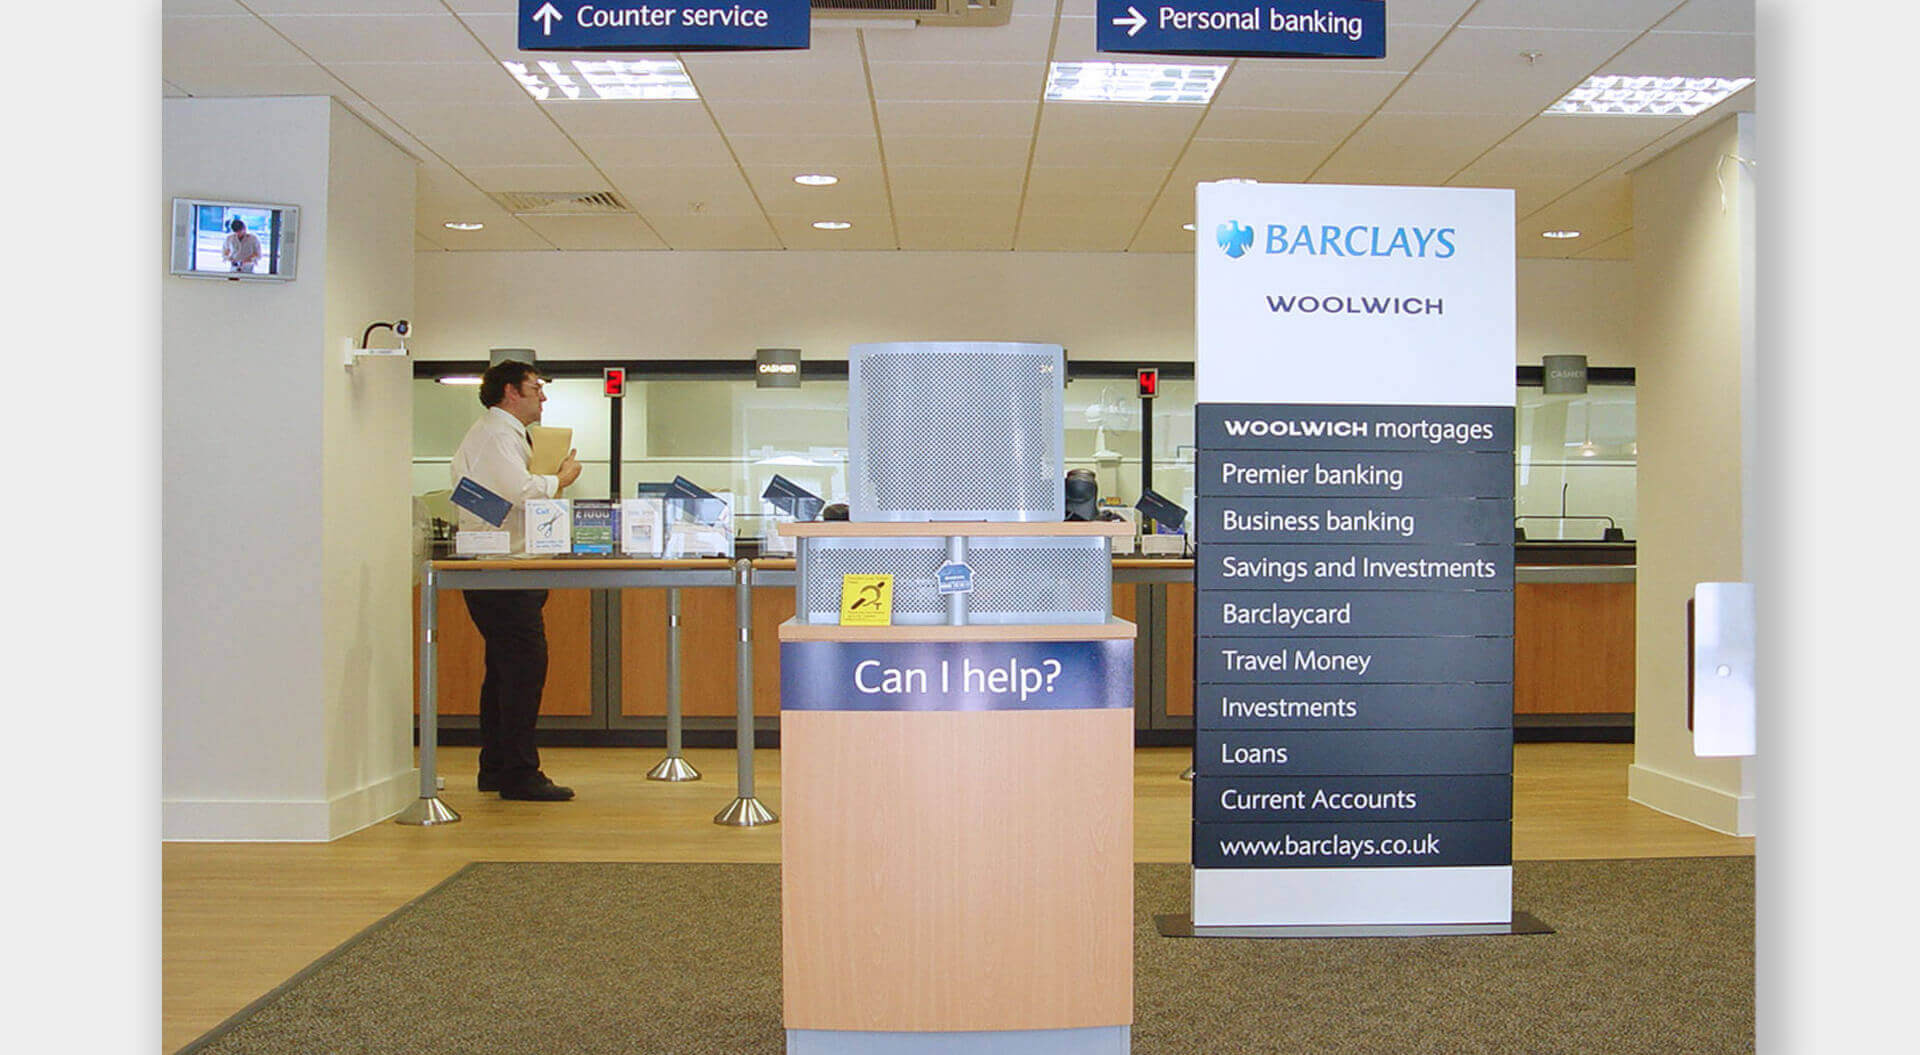 Barclays Bank Reception point at the entrance of the branch